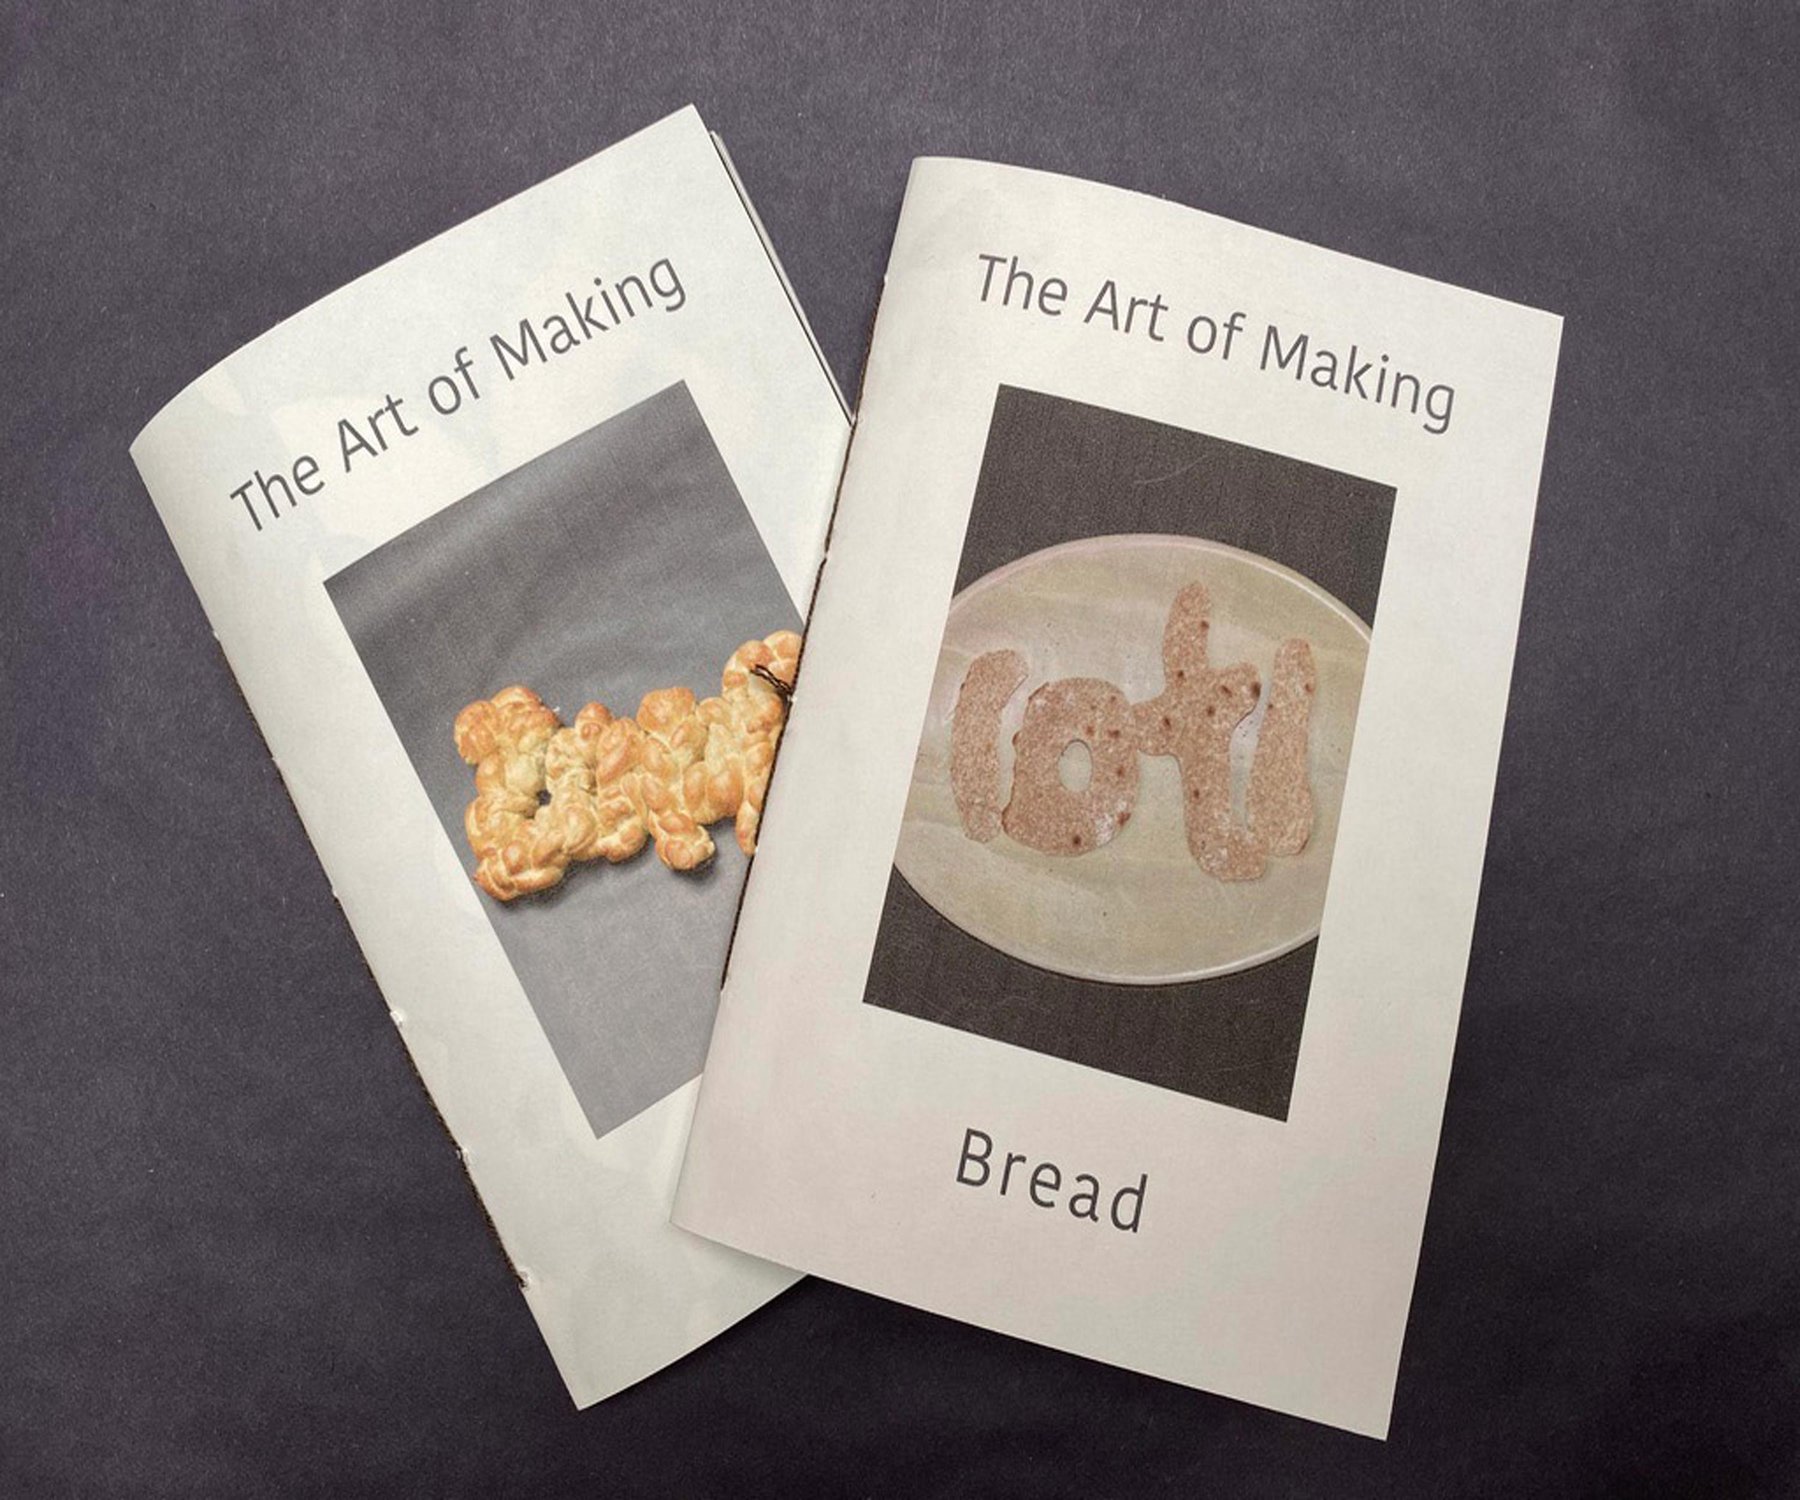 4. The Art of Making Bread